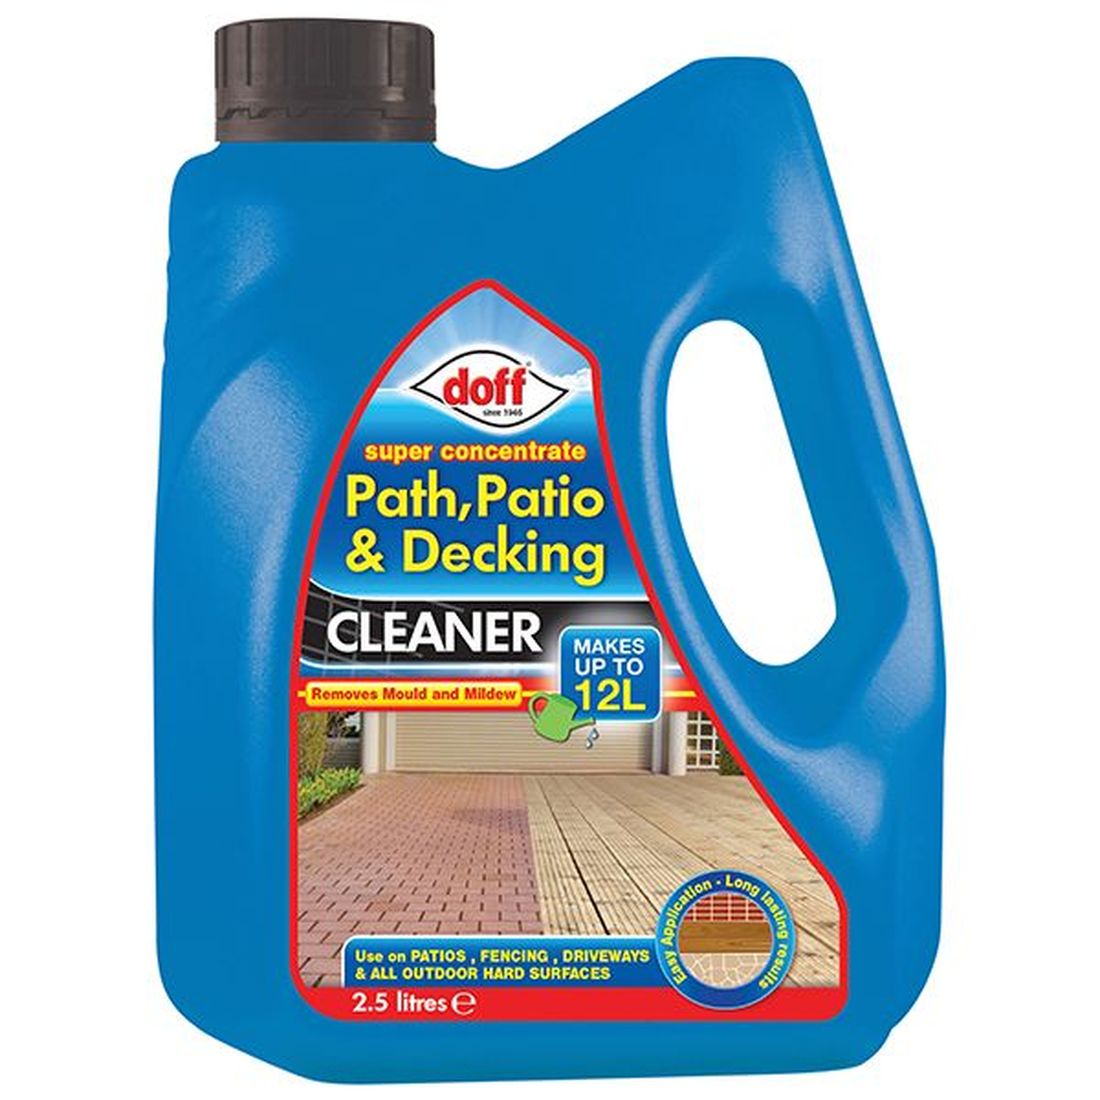 DOFF Super Concentrate Path, Patio & Decking Cleaner 2.5 litre                       